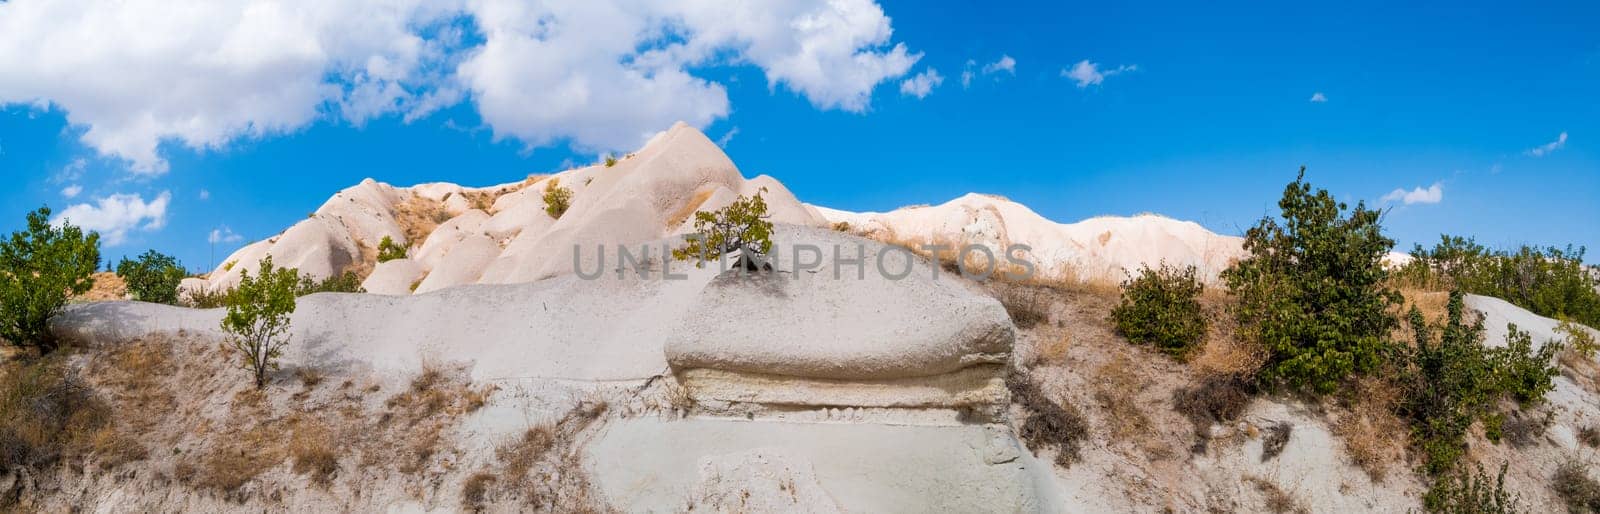 Panoramic view of sand mountain under clear blue sky in Cappadocia, Turkey